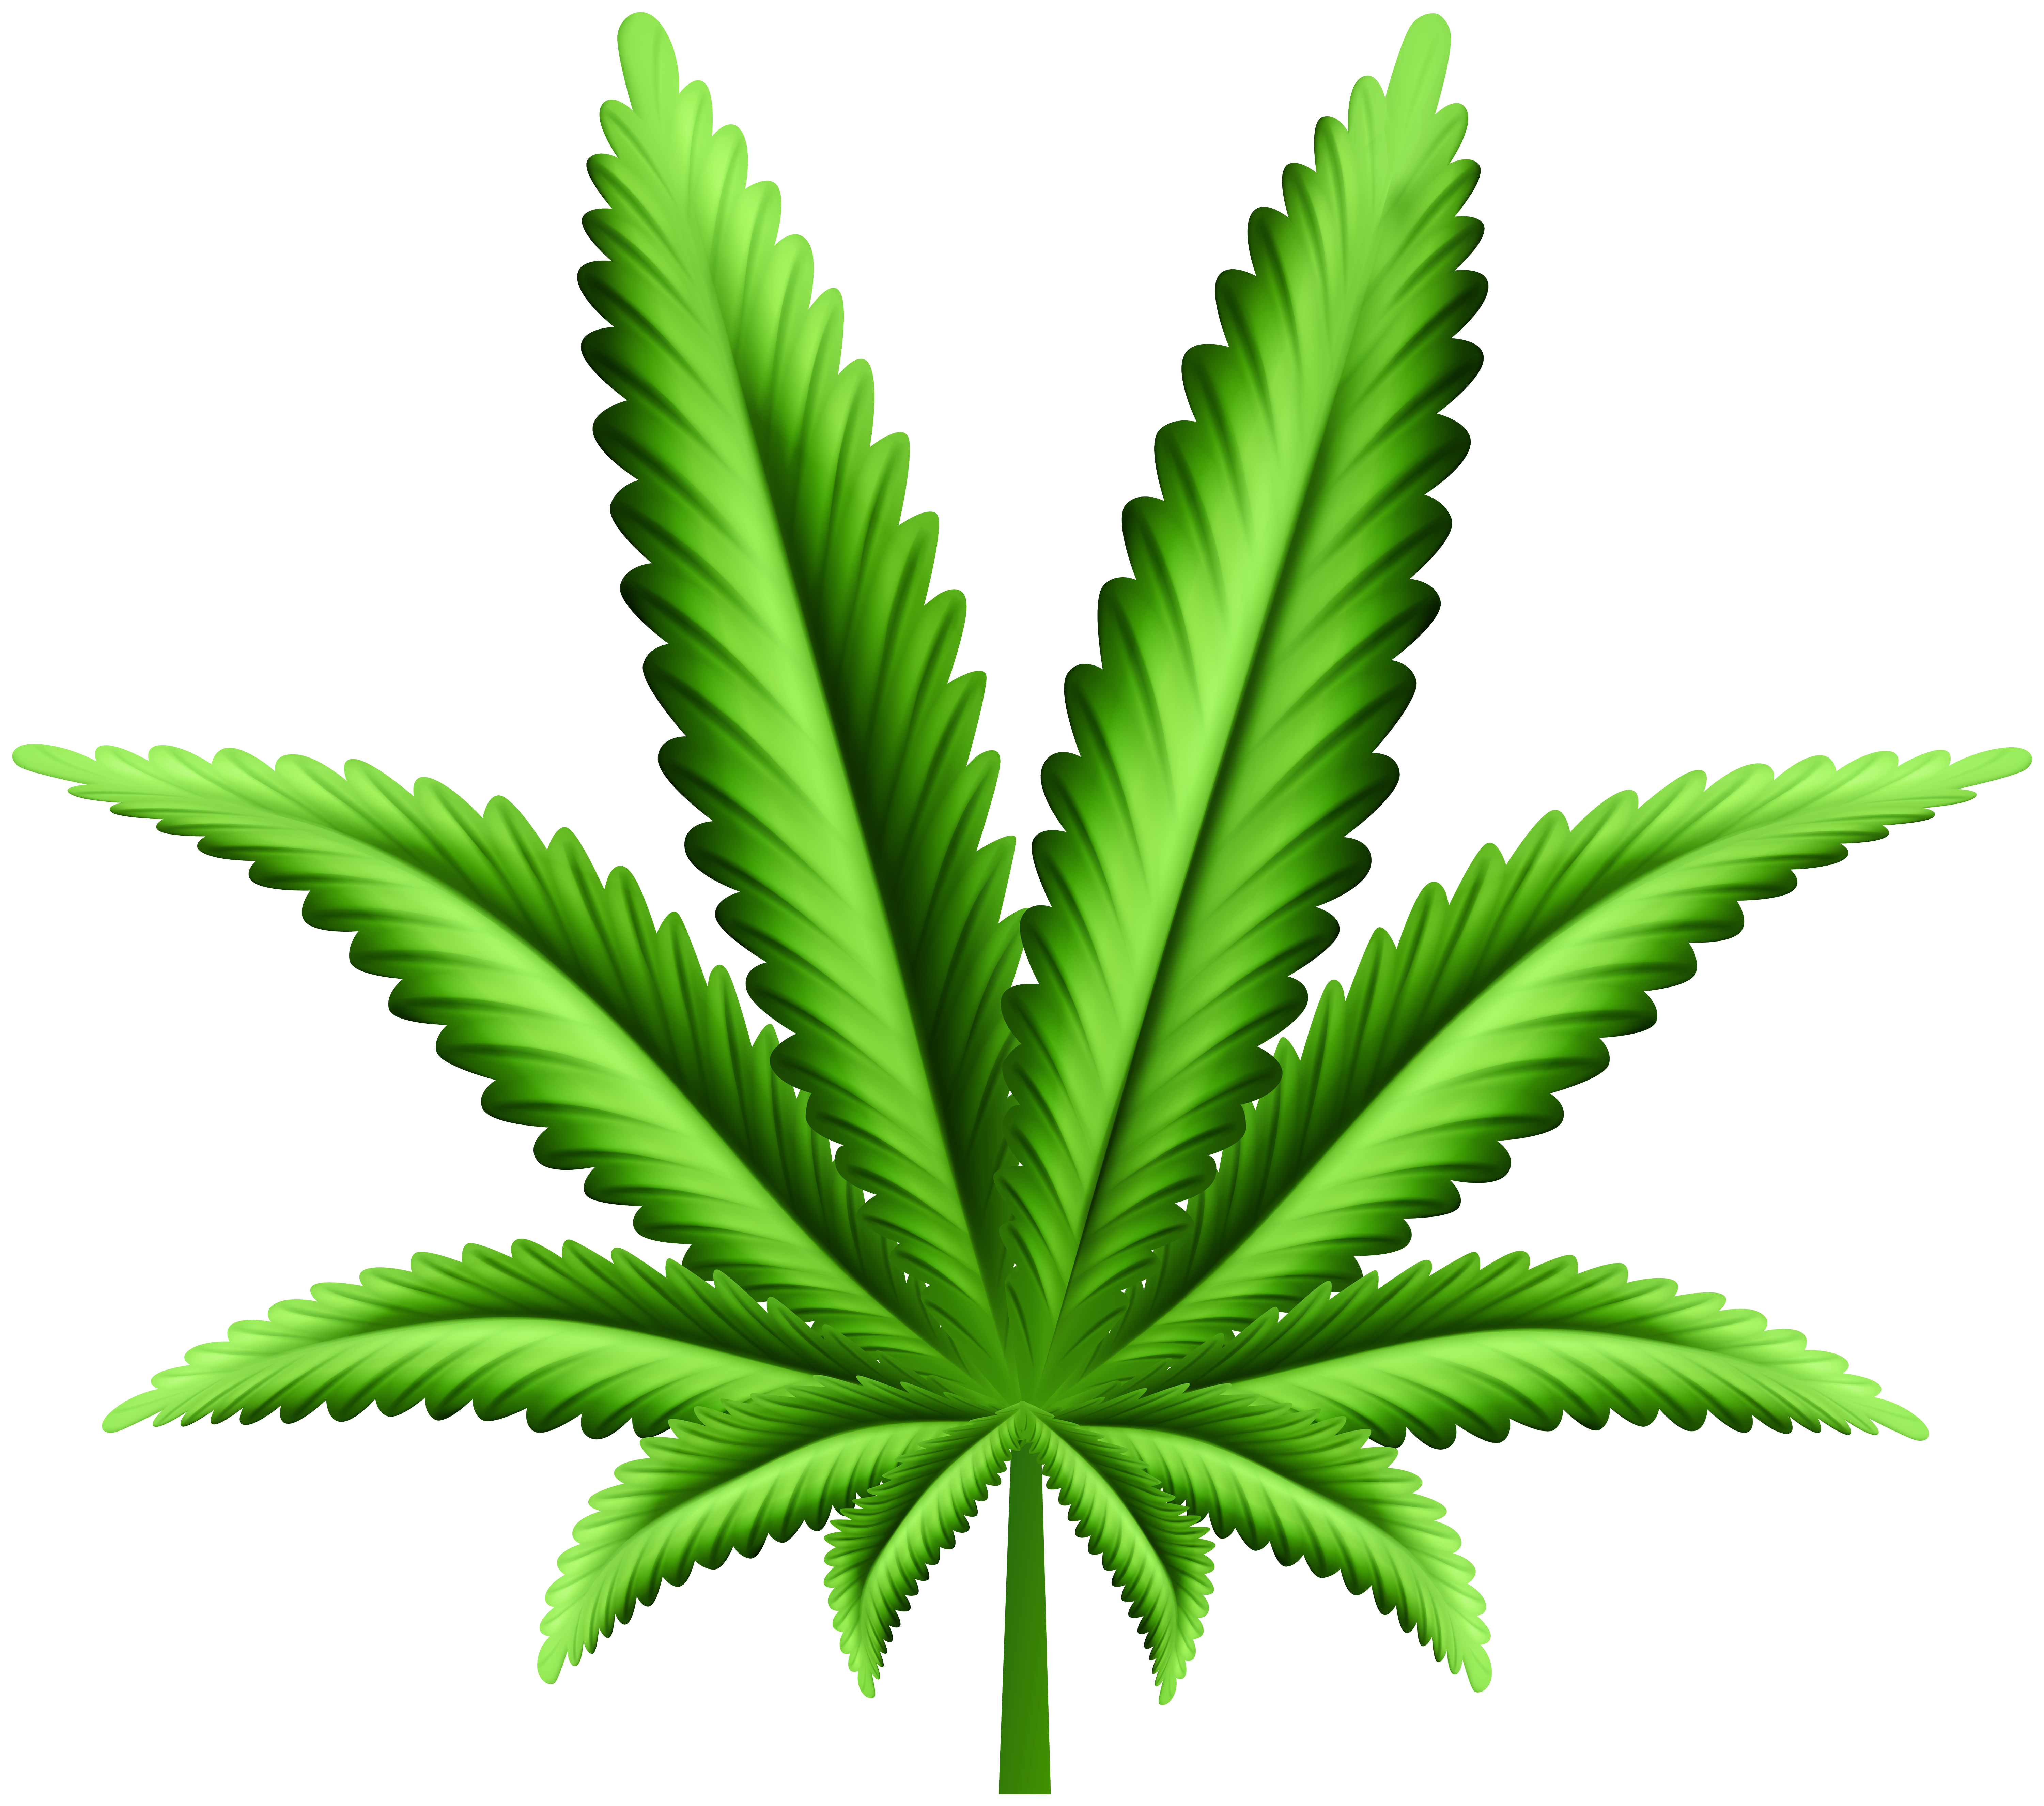 Cannabis Marijuana Leaf Png Clipart Gallery Yopriceville High Quality Images And Transparent Png Free Clipart ✓ free for commercial use ✓ high quality images. gallery yopriceville